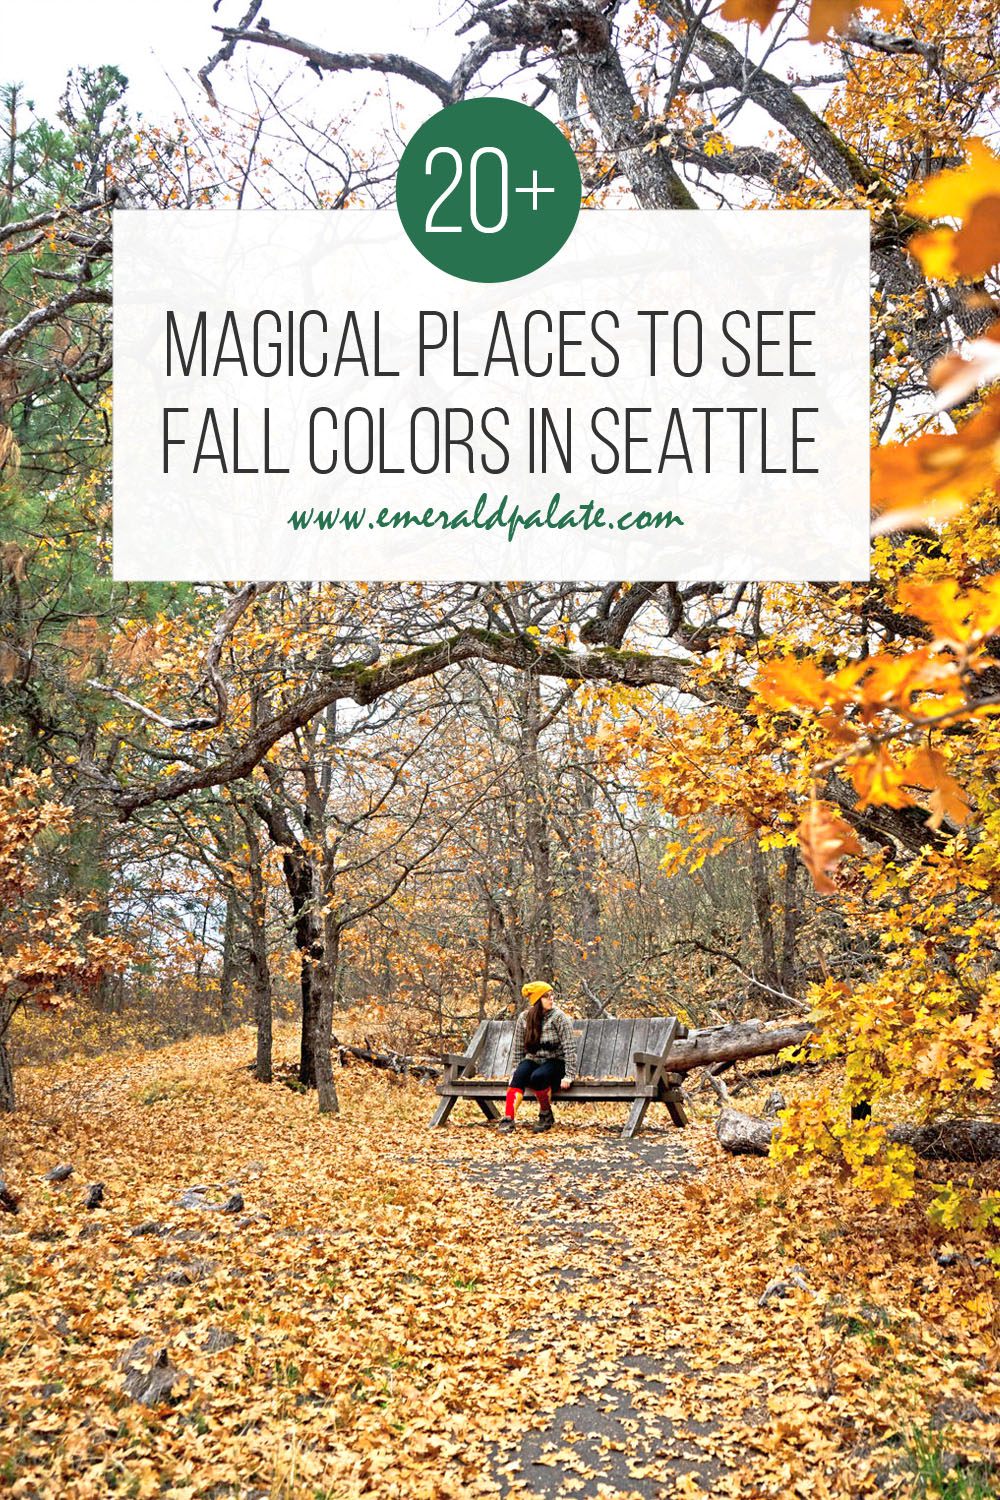 One of the best things to do in Seattle in fall is hunt for fall colors in Washington state. We have a ton of places for fall foliage in Washington, but there are also a ton of fall colors in Seattle too! If you love autumn colors like red, rust, orange, yellow, and gold, here is where to go leaf peeping for fall colors in the Pacific Northwest!